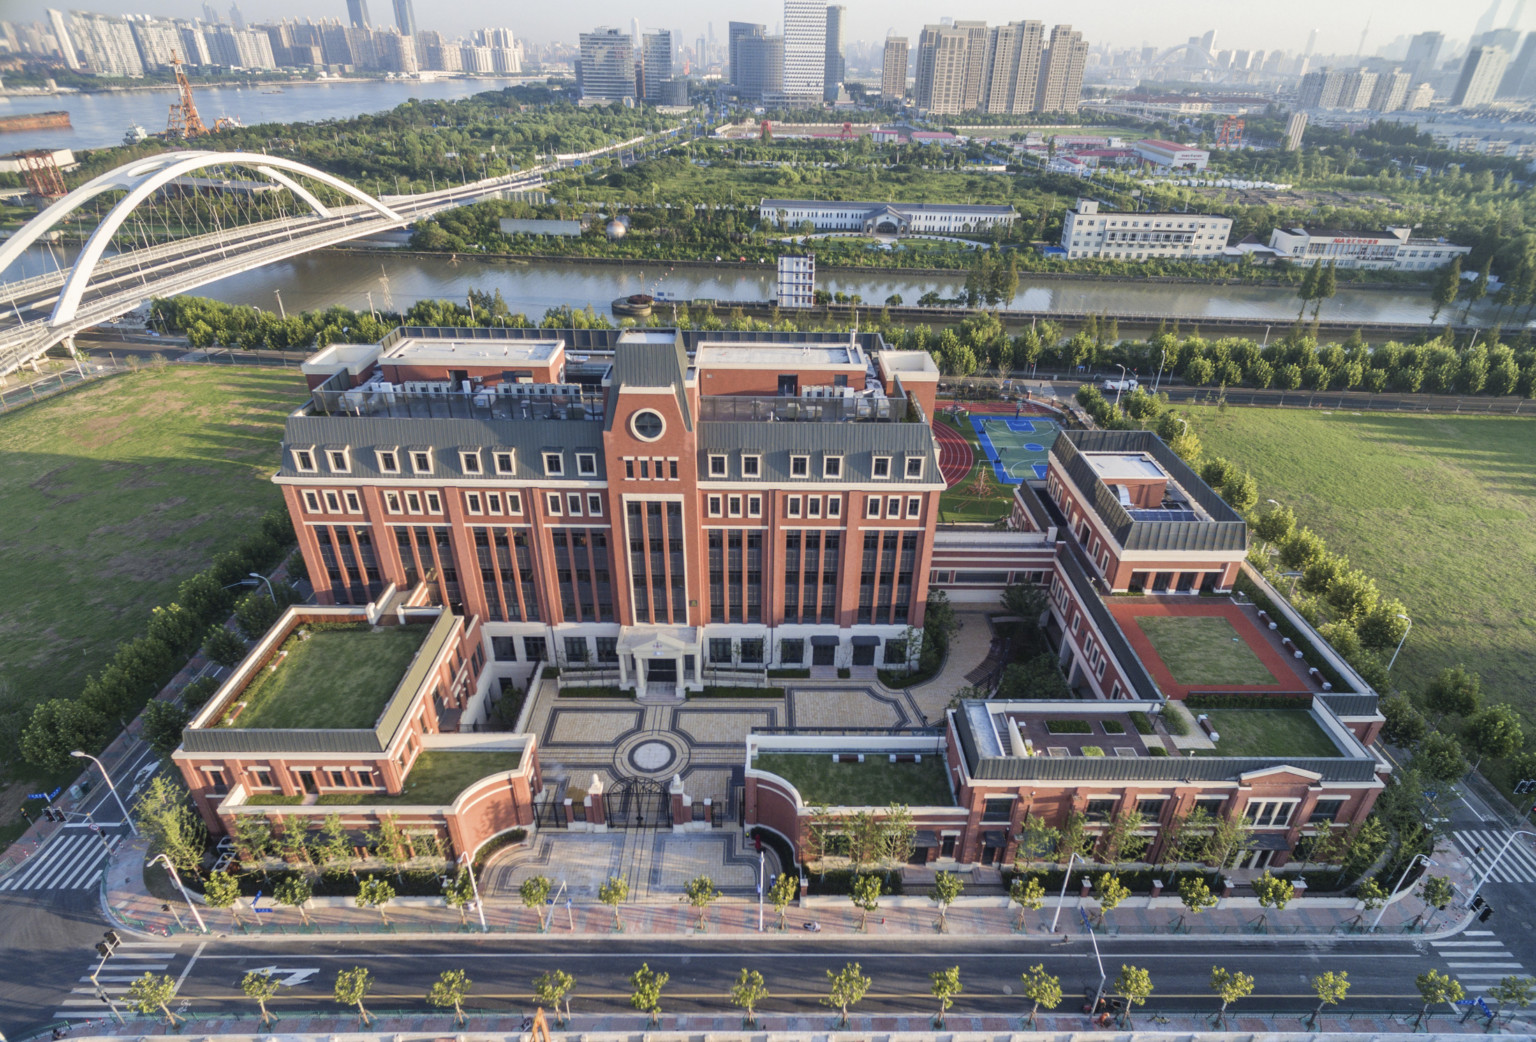 Aerial view of Huili campus from front. A gated stone courtyard is surrounded by brick buildings with living roof sections